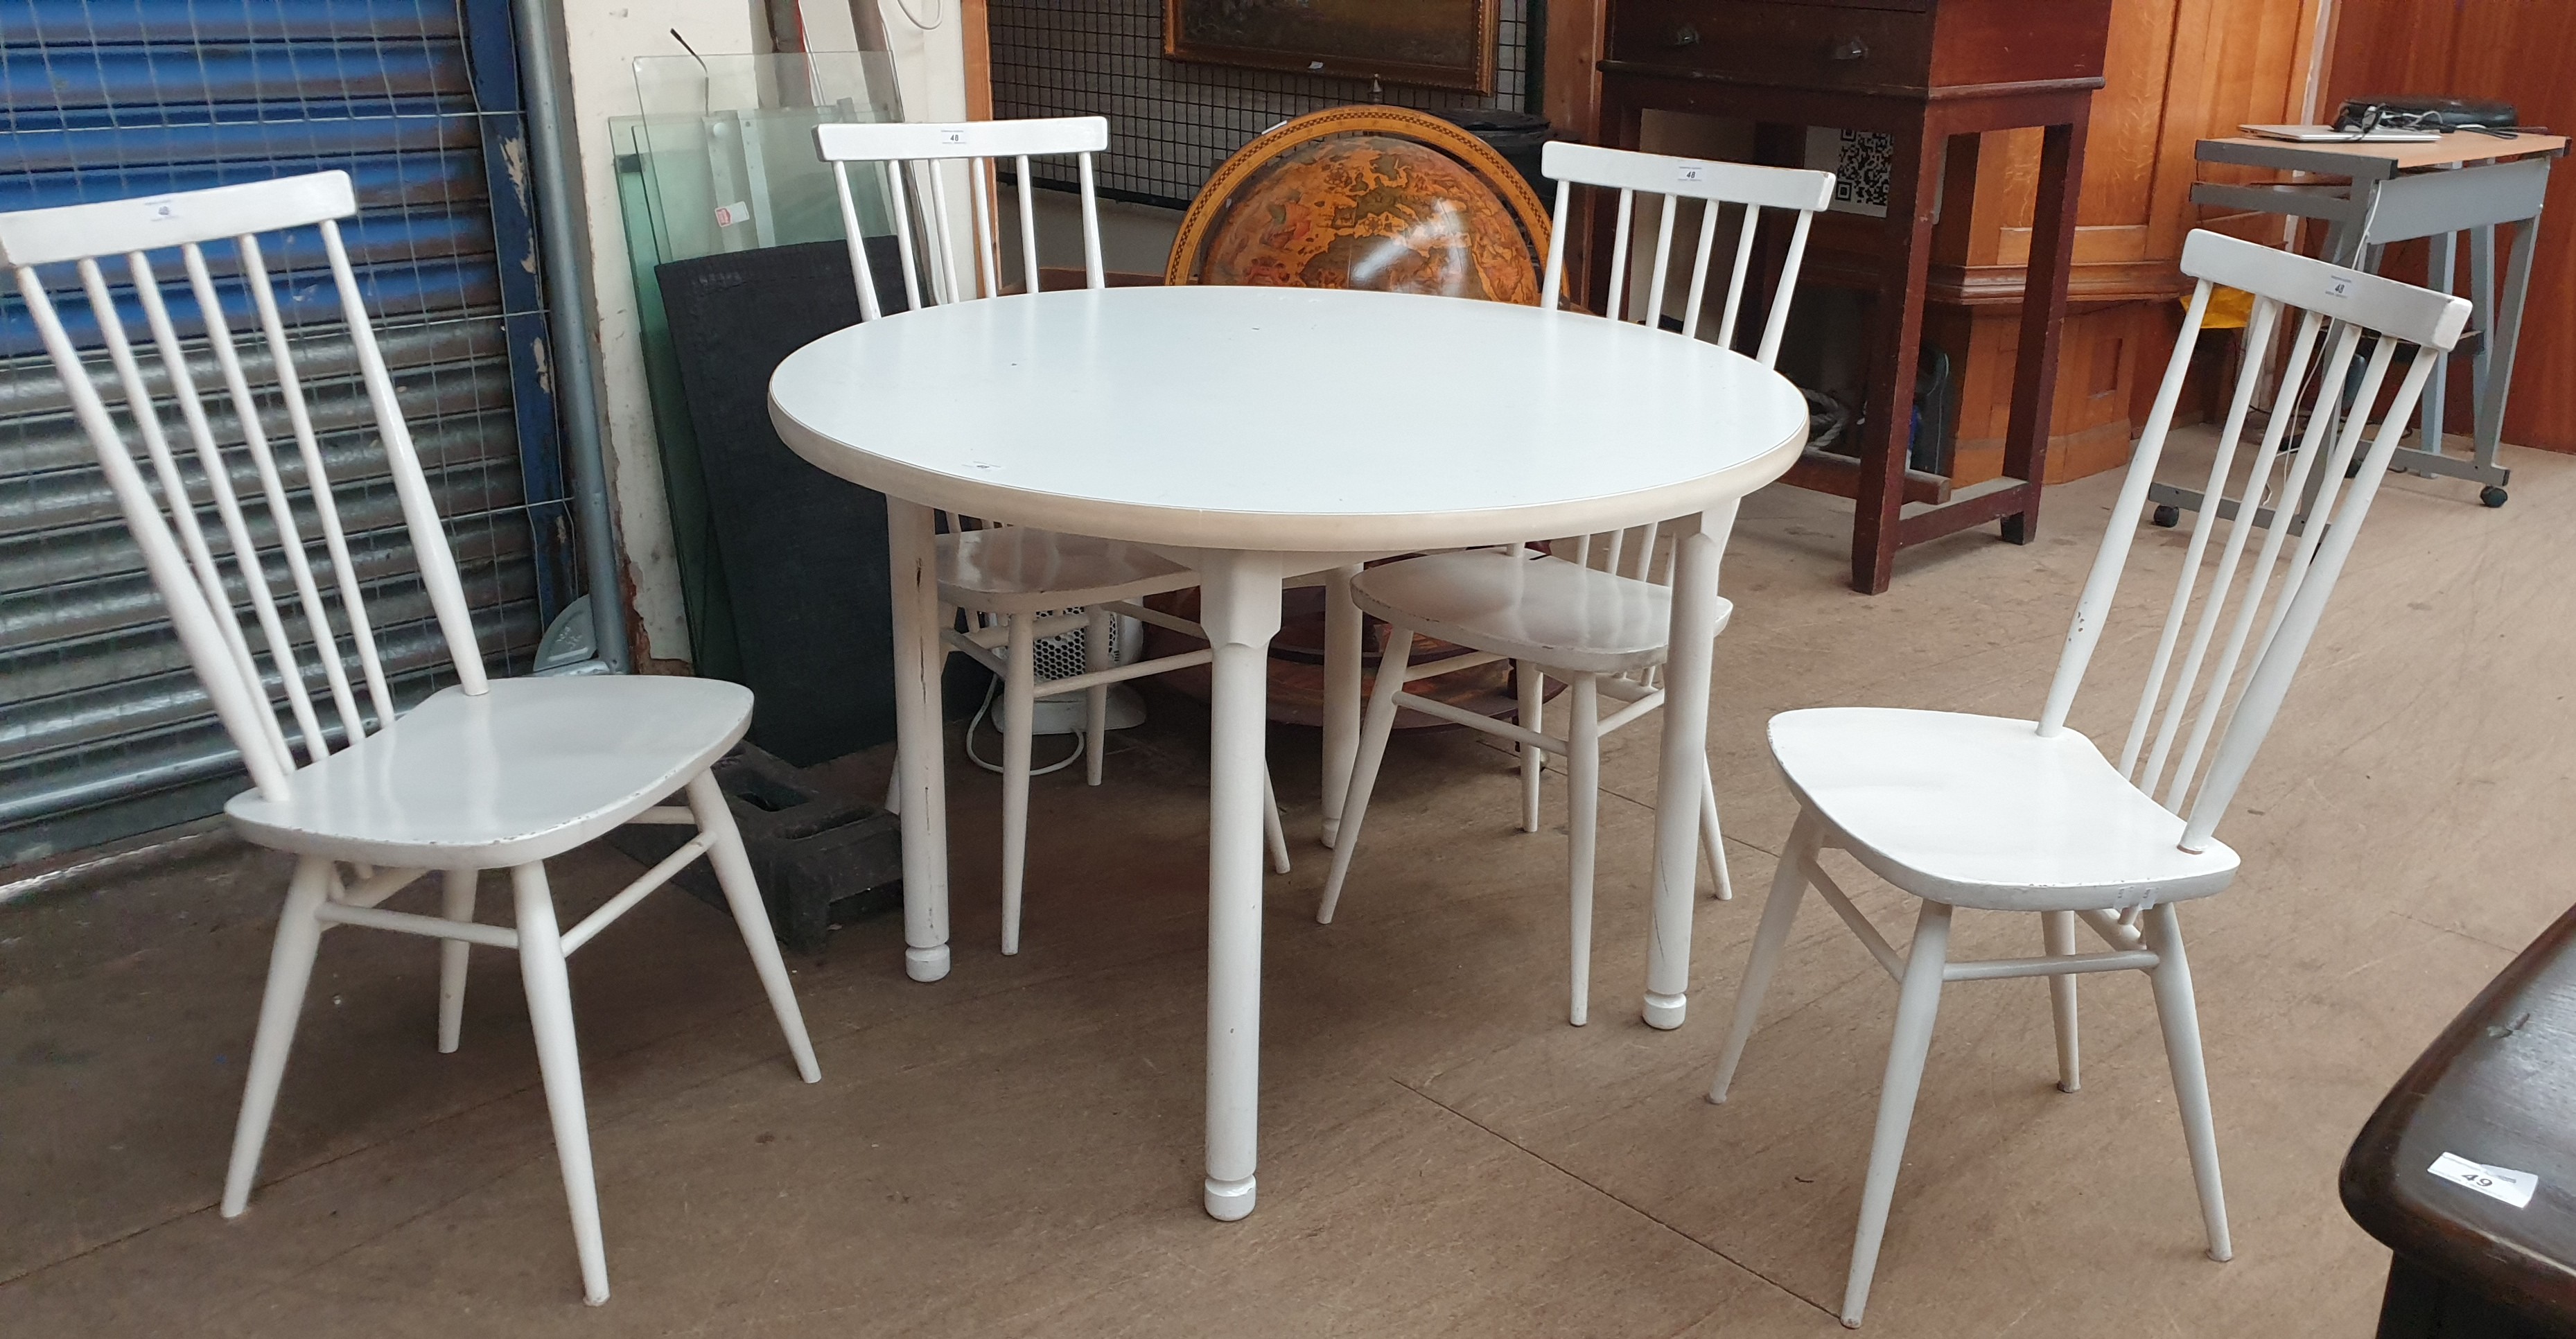 A mid 20th century white painted dining table and four chairs - Image 3 of 3